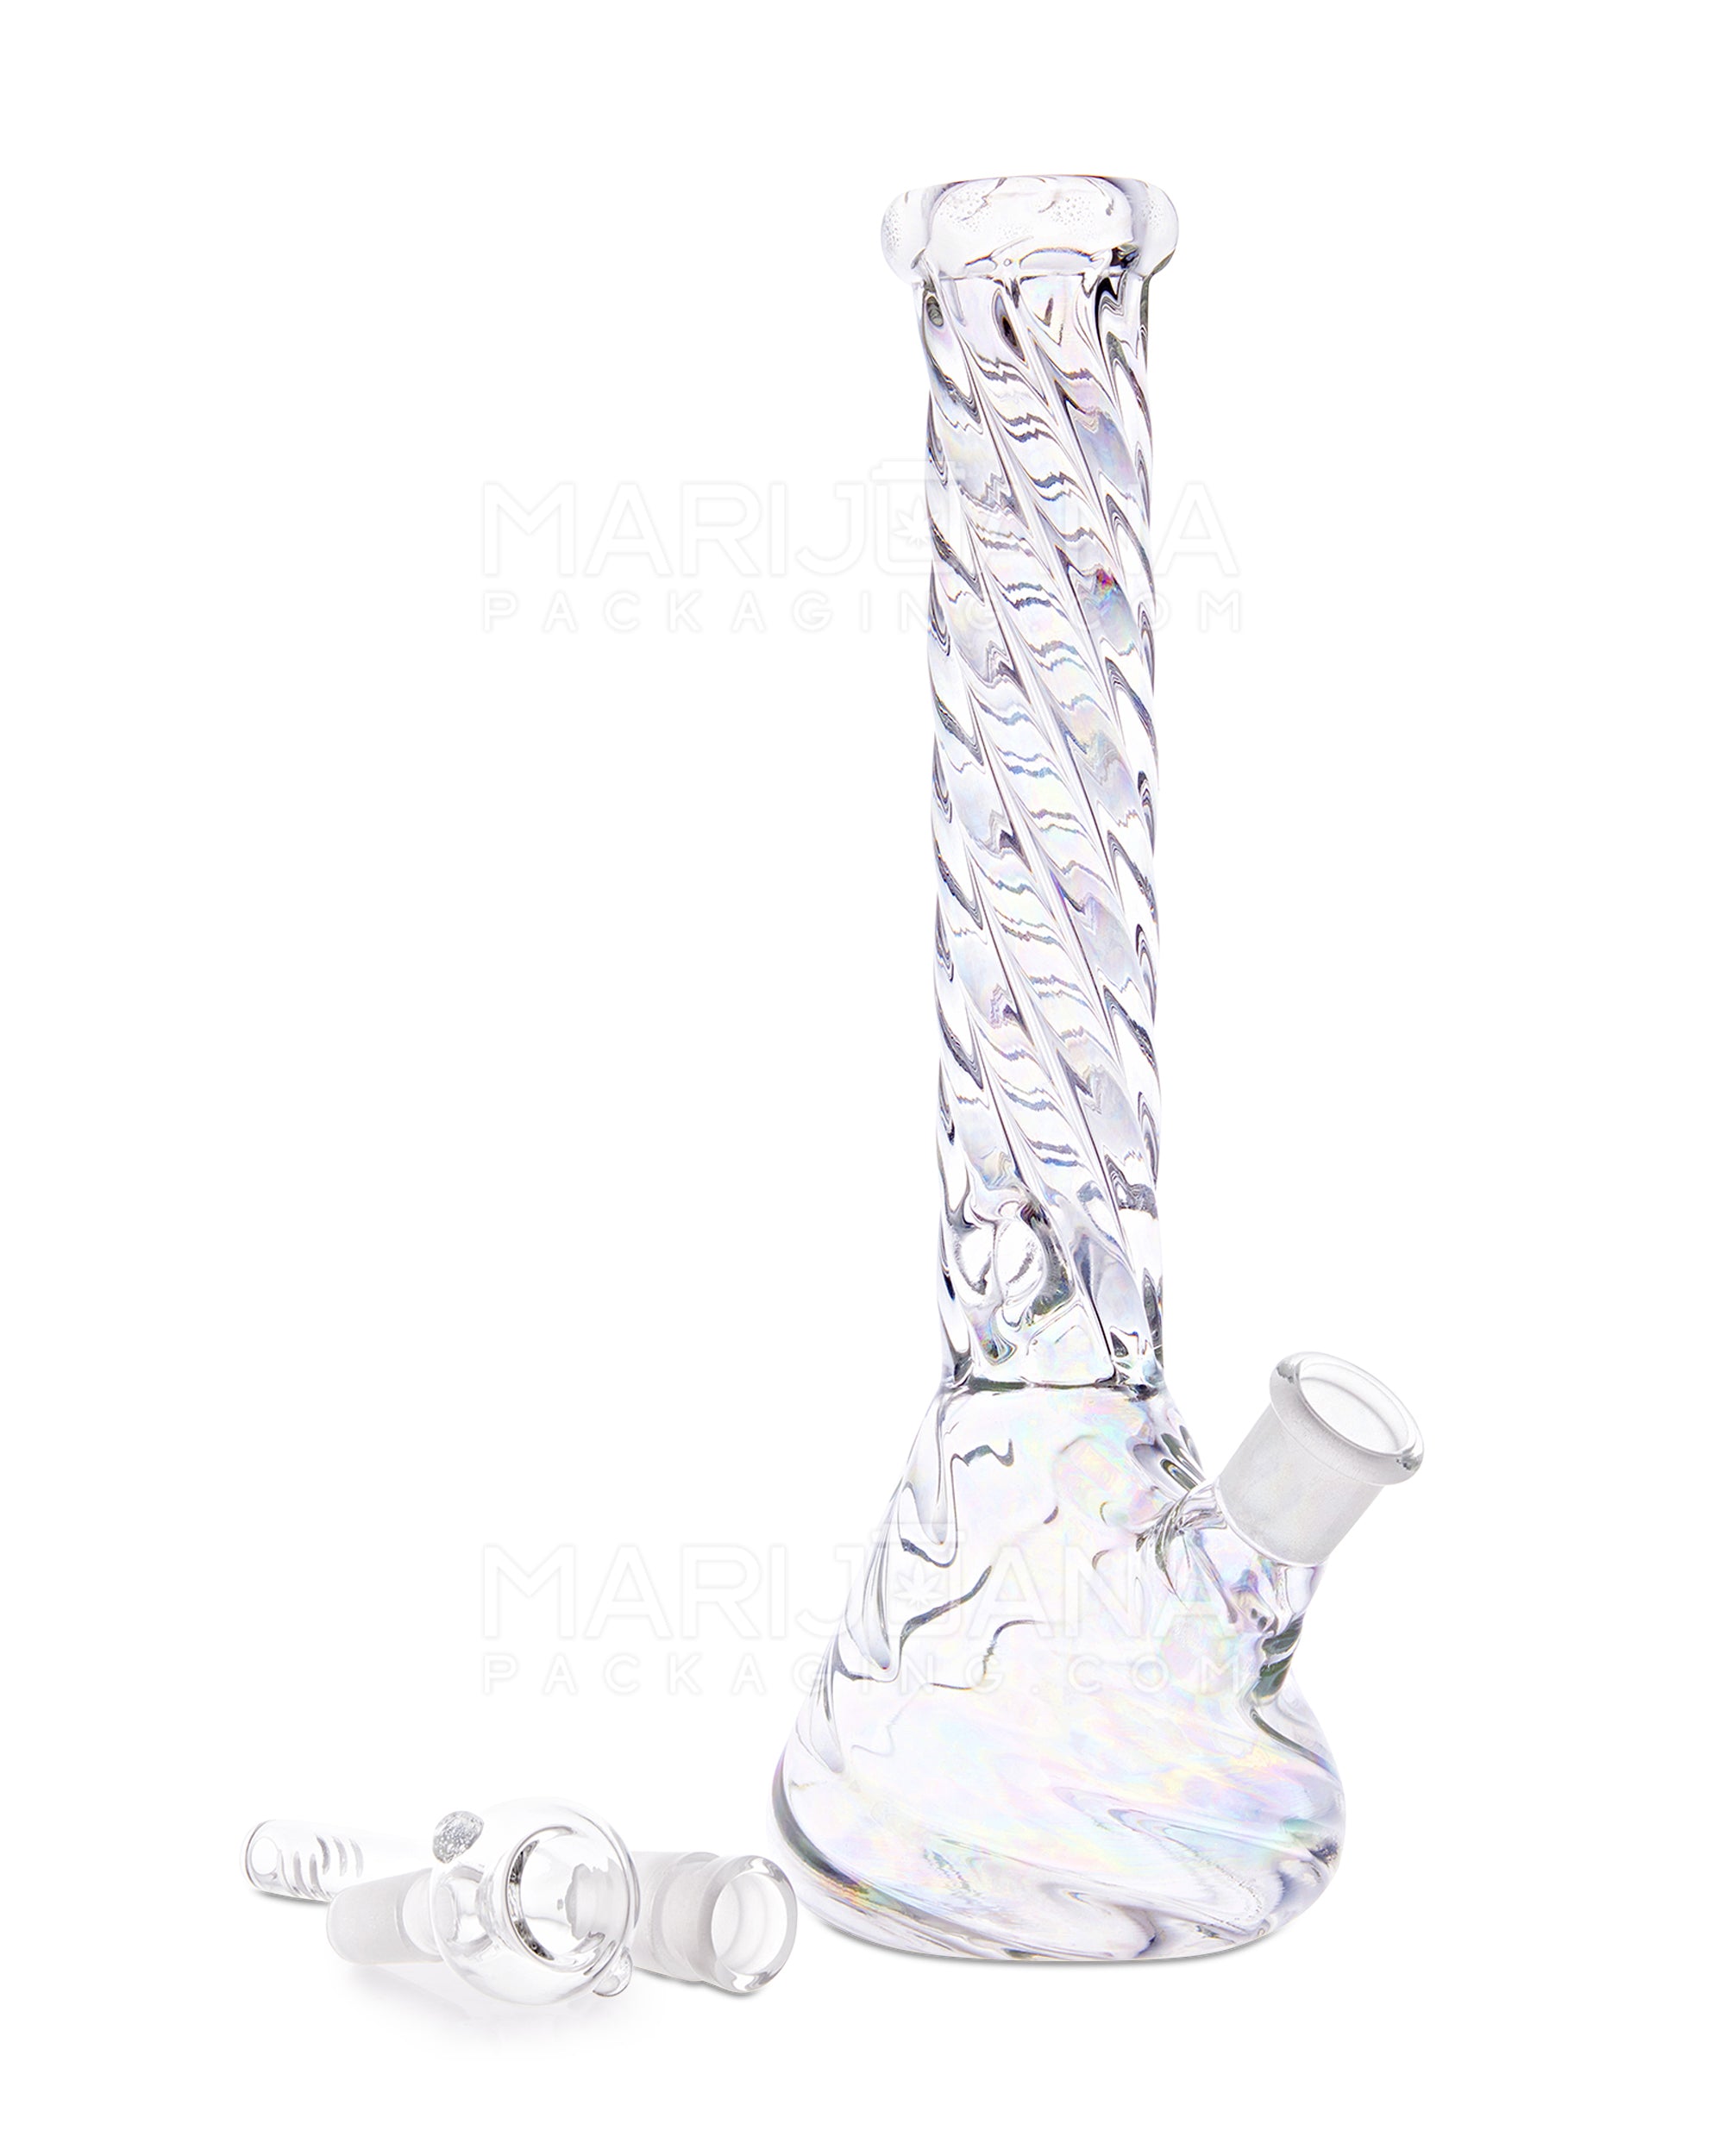 Straight Neck Iridescent Twisted Glass Beaker Water Pipe | 10.5in Tall - 14mm Bowl - Clear